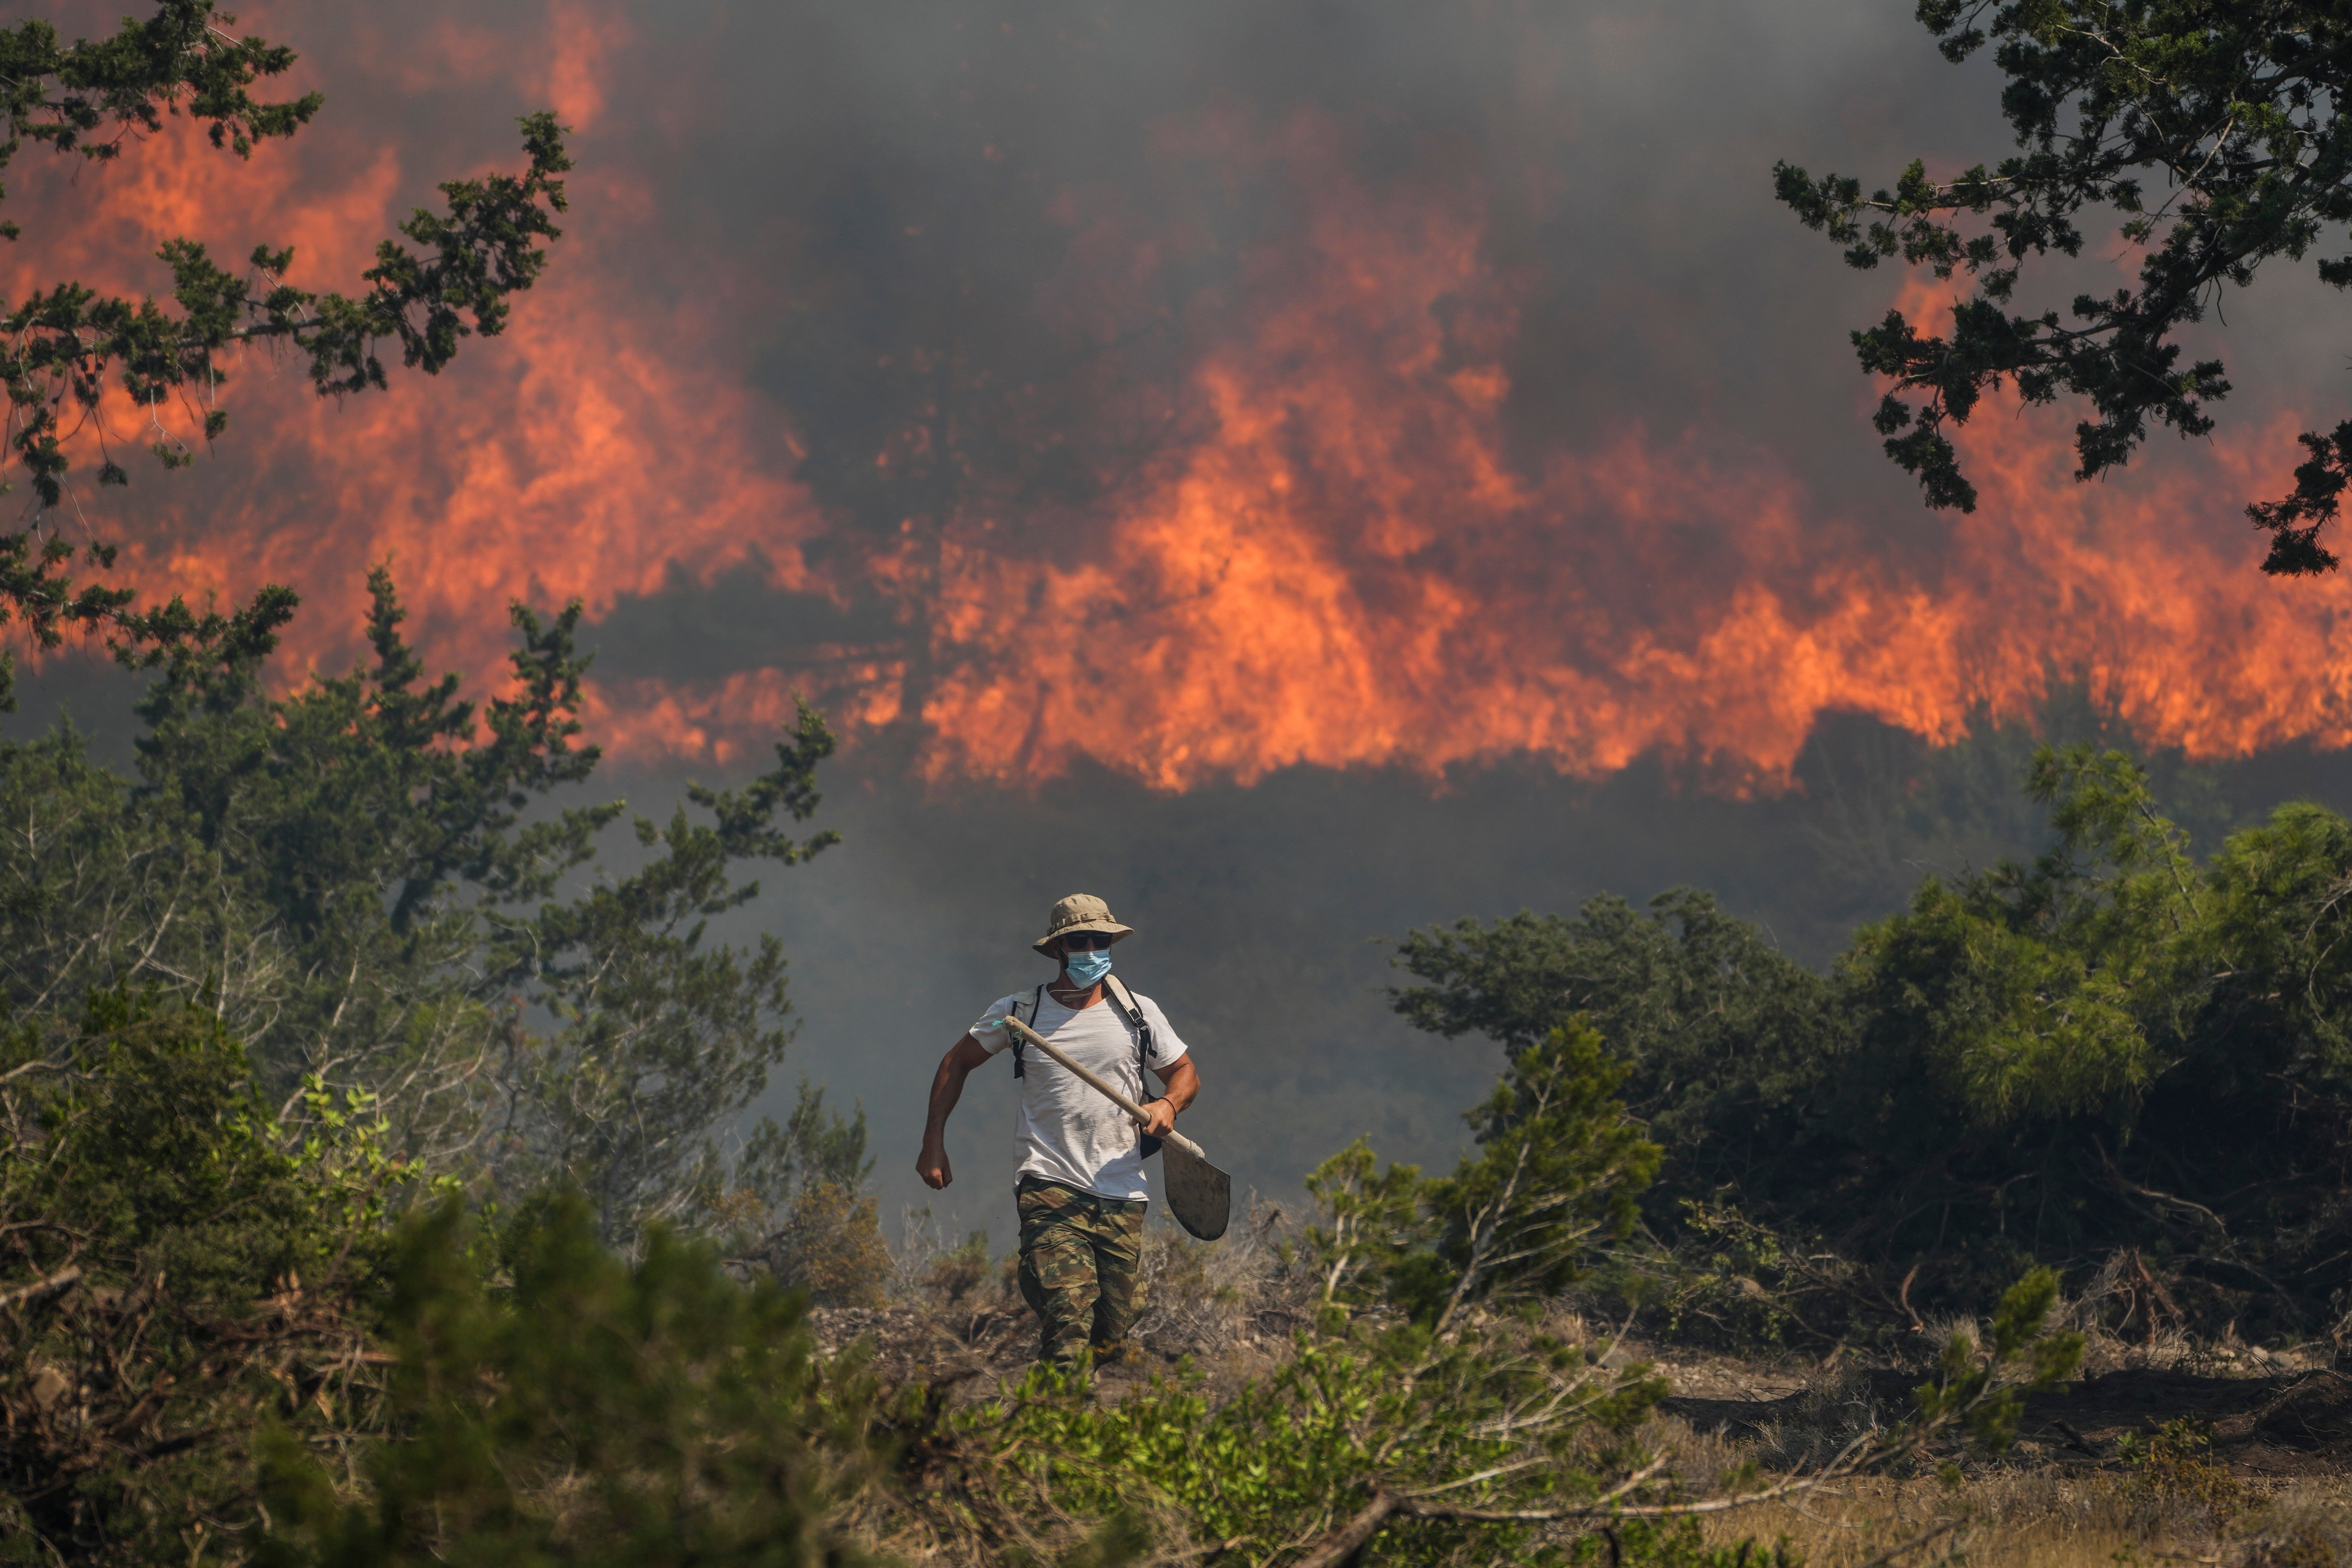 Rhodes has been hit by wildfires amid soaring temperatures